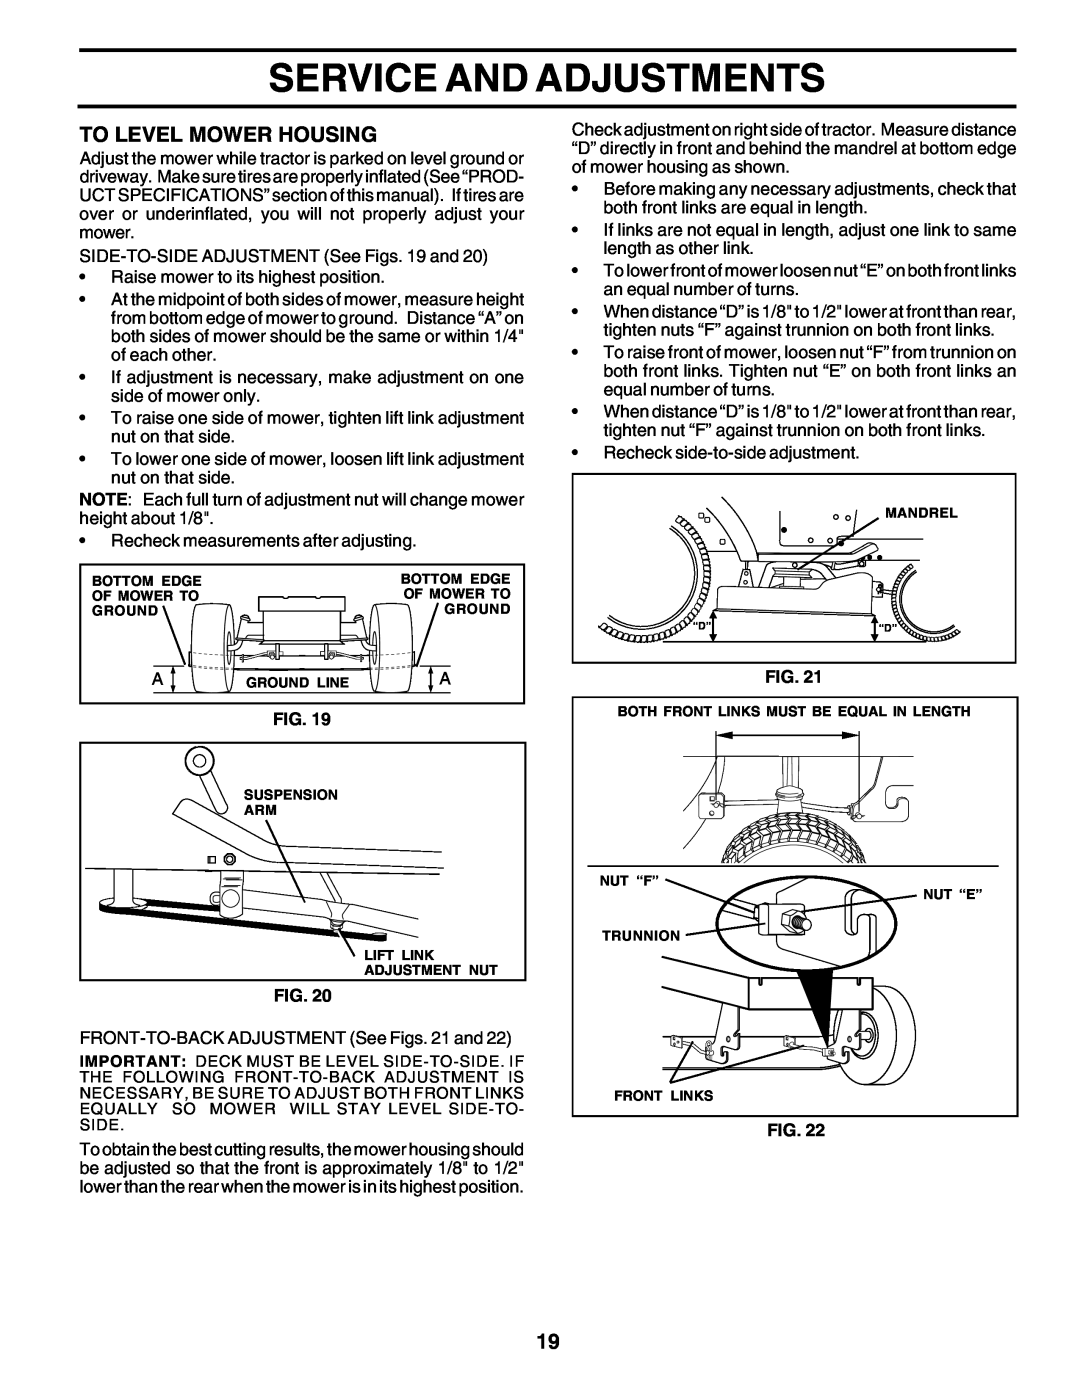 Poulan 180198 owner manual To Level Mower Housing, Service And Adjustments 